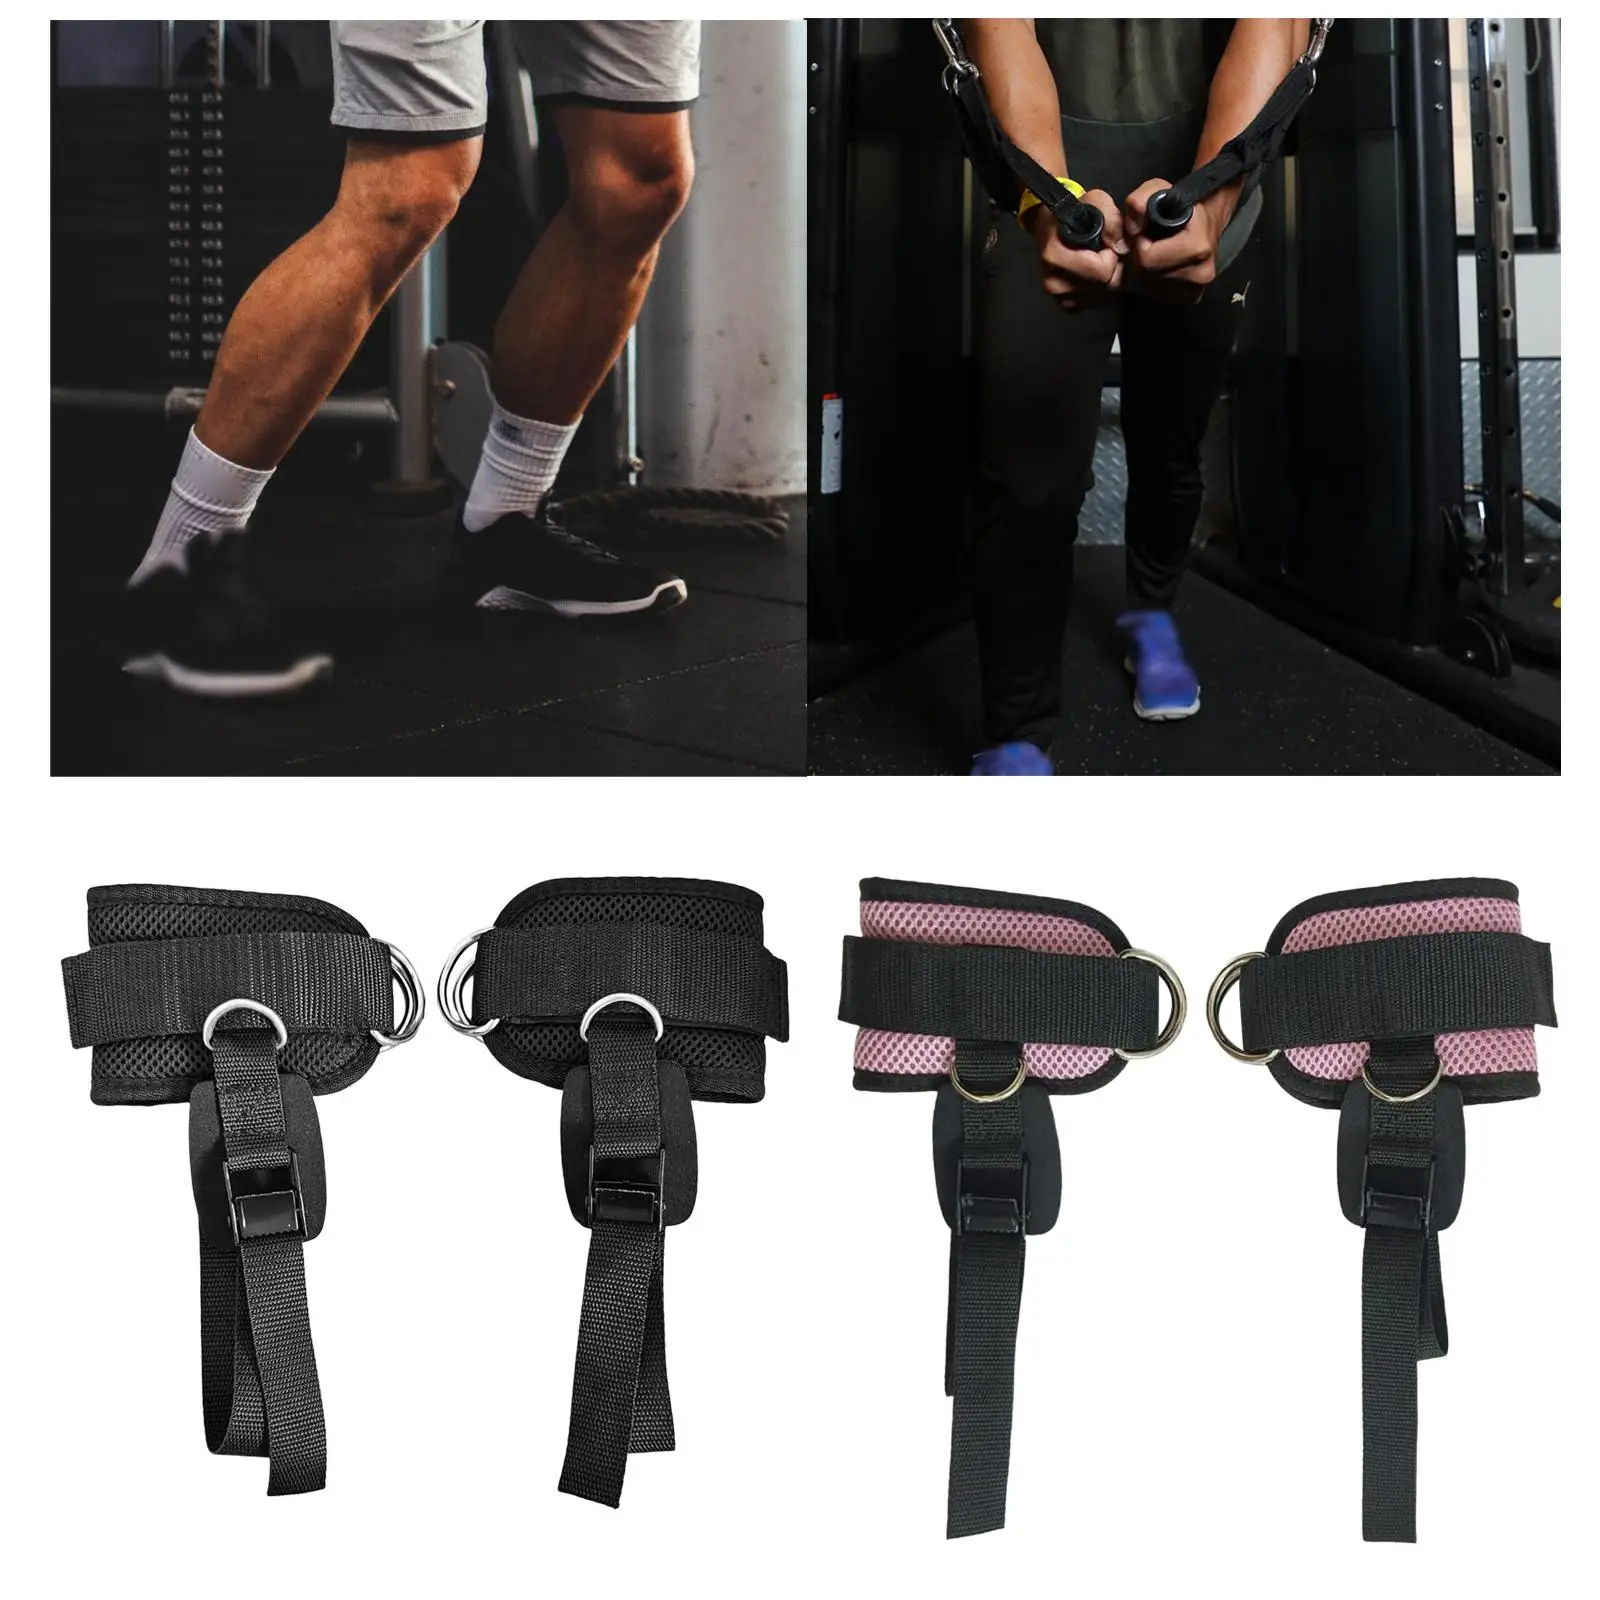 Padded Ankle Straps for Cable Machines Lower Body Exercises Leg Strength Training Women Men Ankle Strap Gym Fitness Accessories